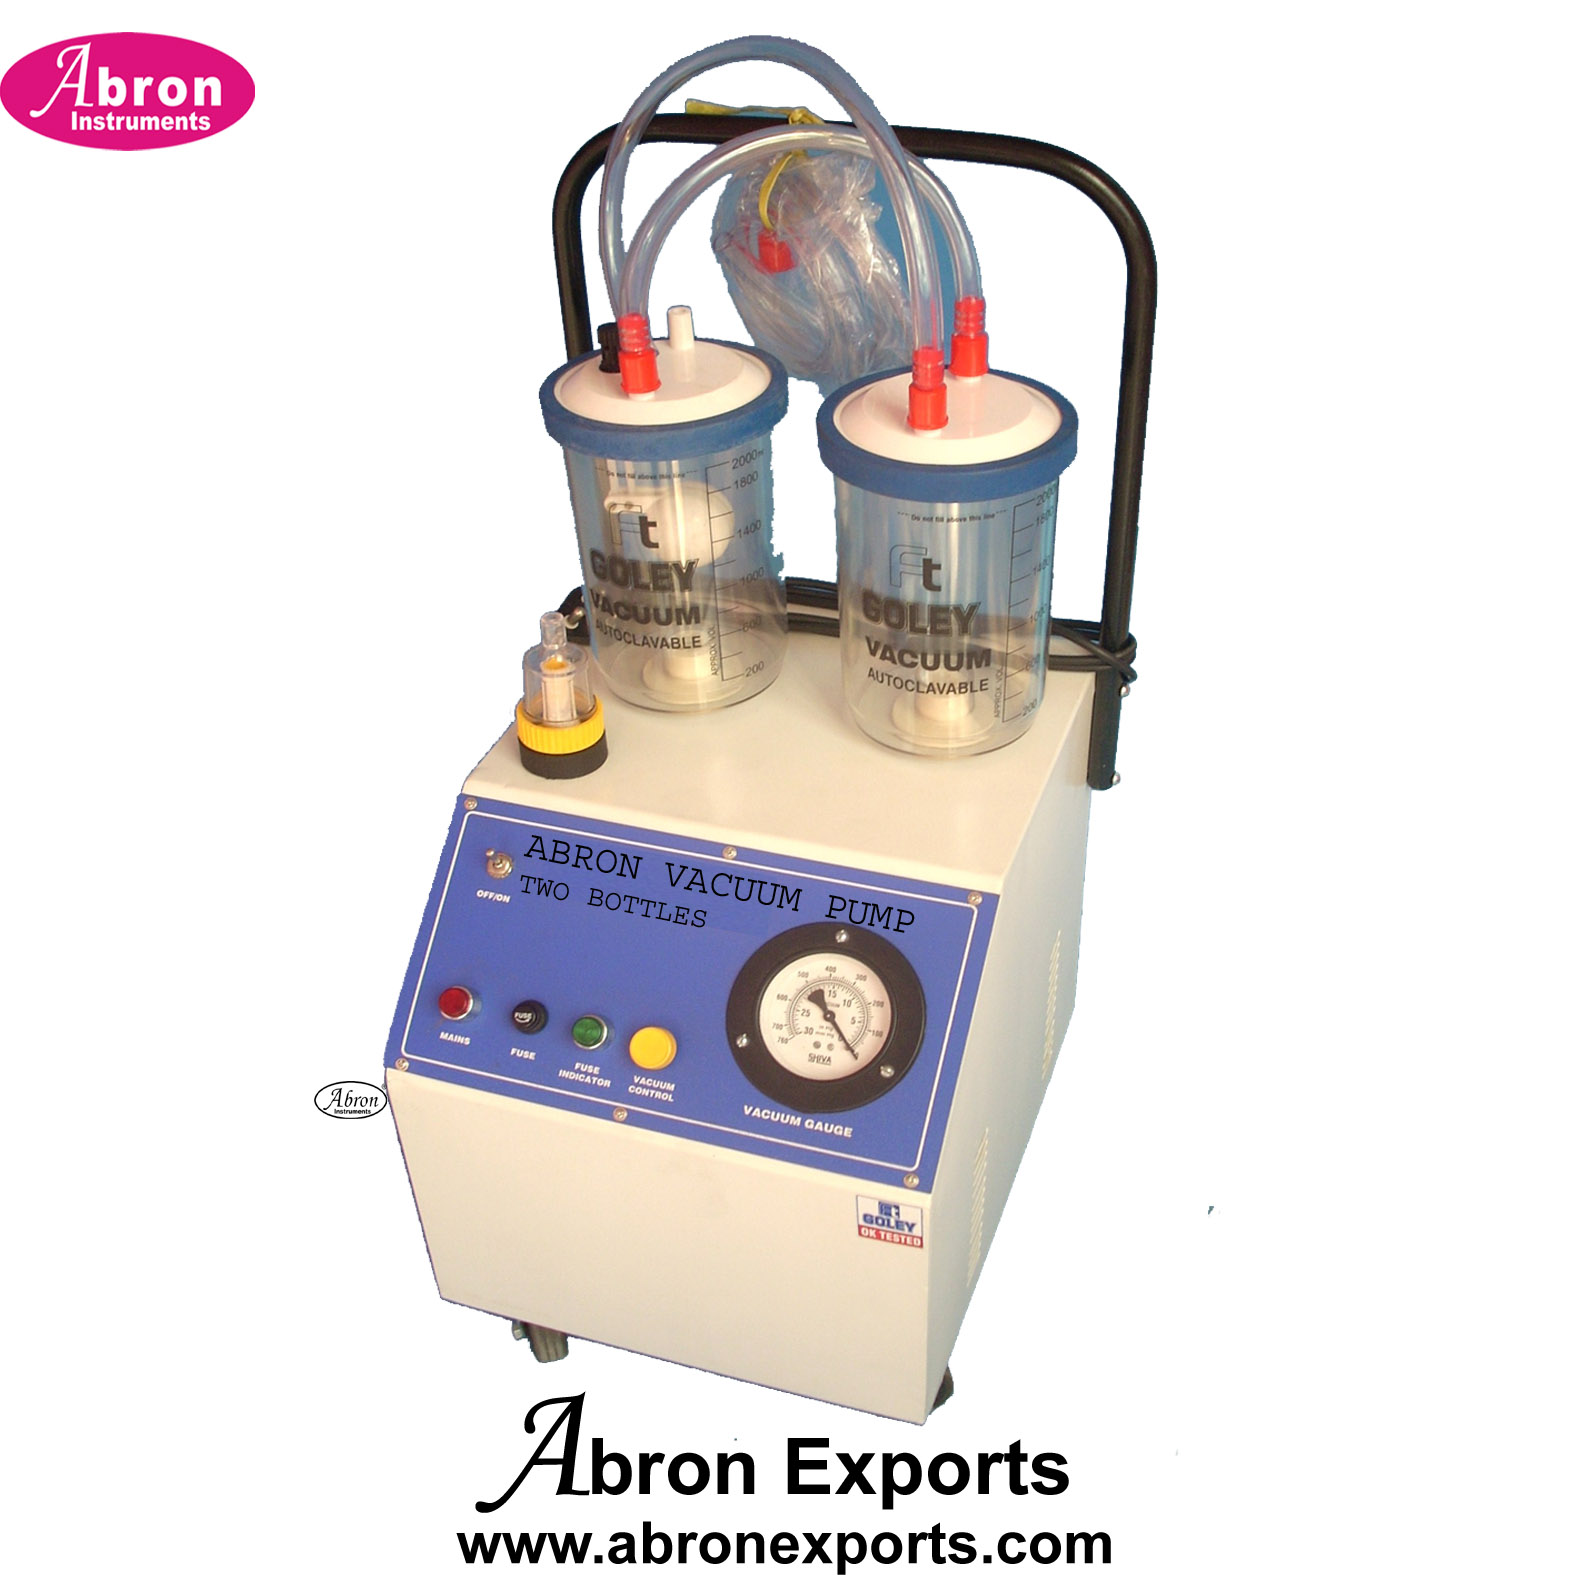 Hospital Surgical Suction Machine With Glass Two Bottles Vacuum Pump With Tubes Portable Abron ABD-4190 ABM-2315A 